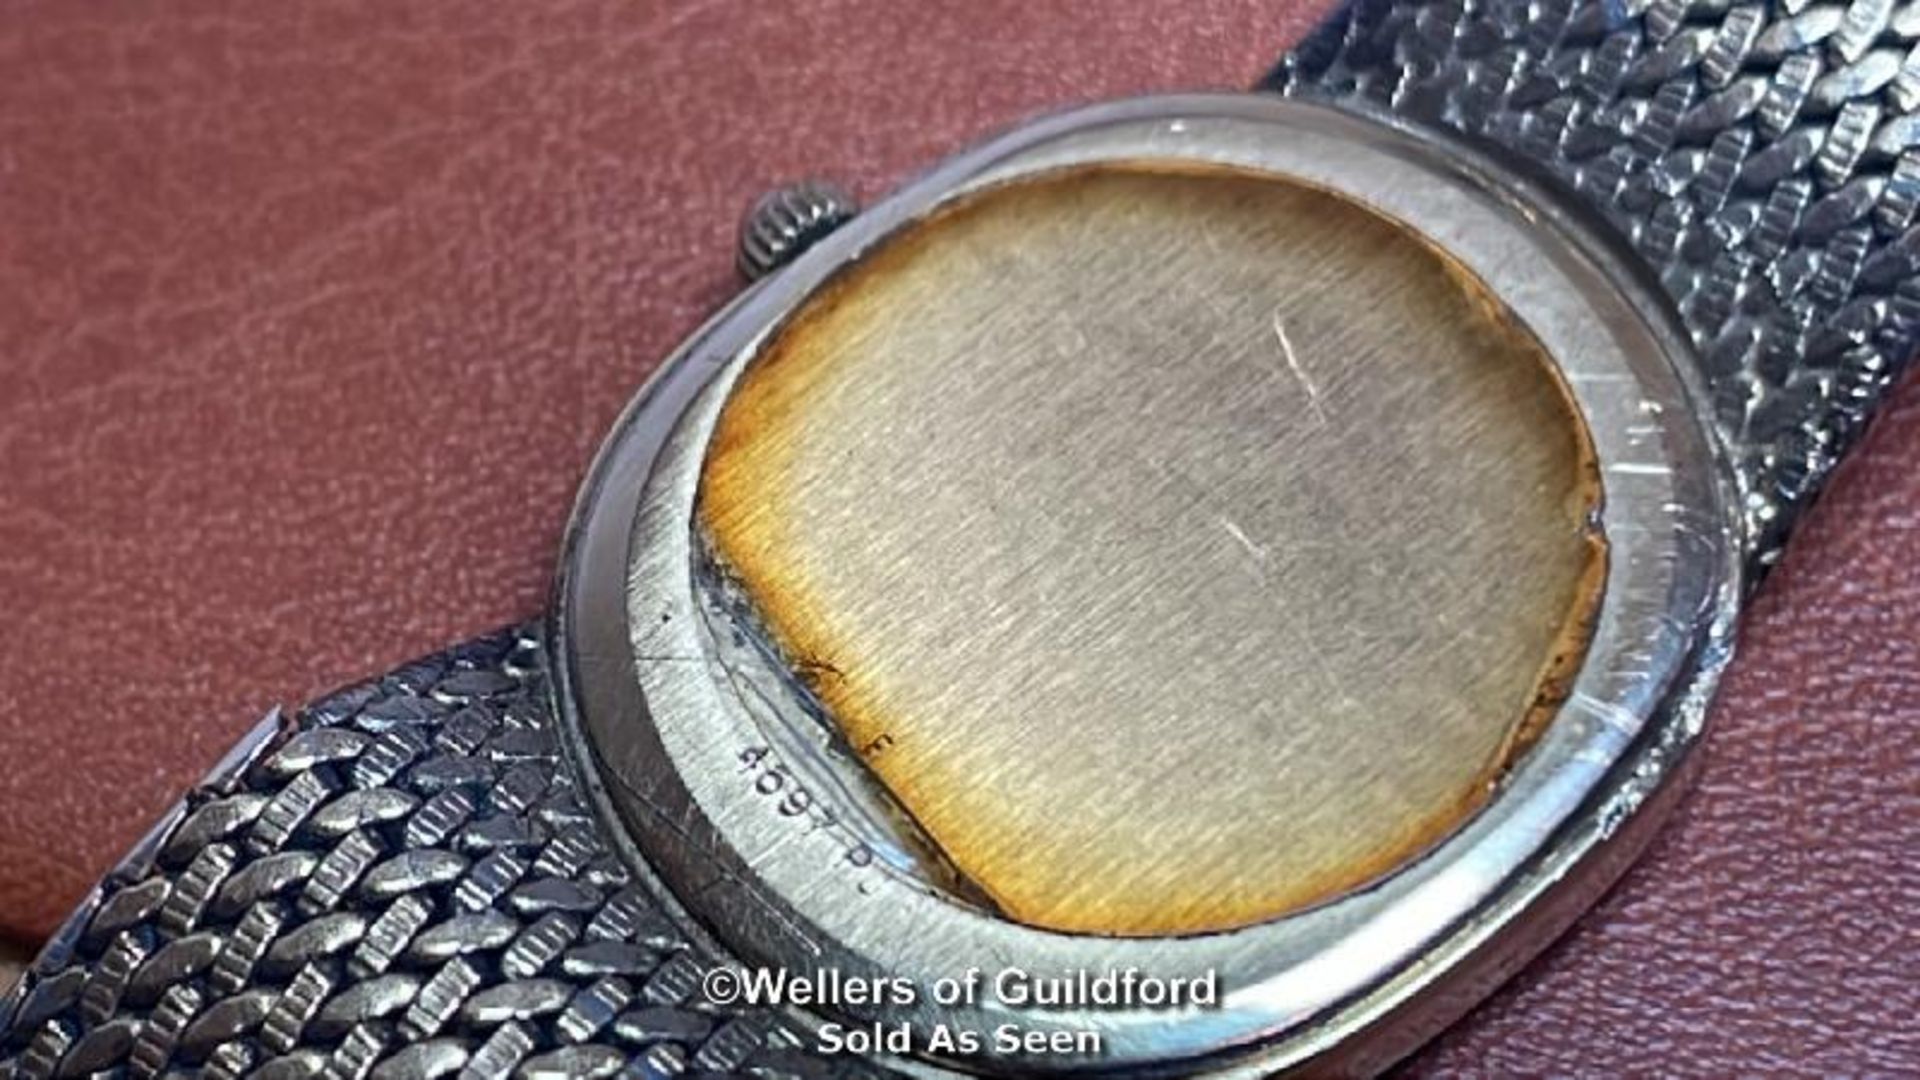 Vintage Girrard Perregaux ellipse gold plated dress watch, 2.5cm wide dial with box - Image 8 of 12